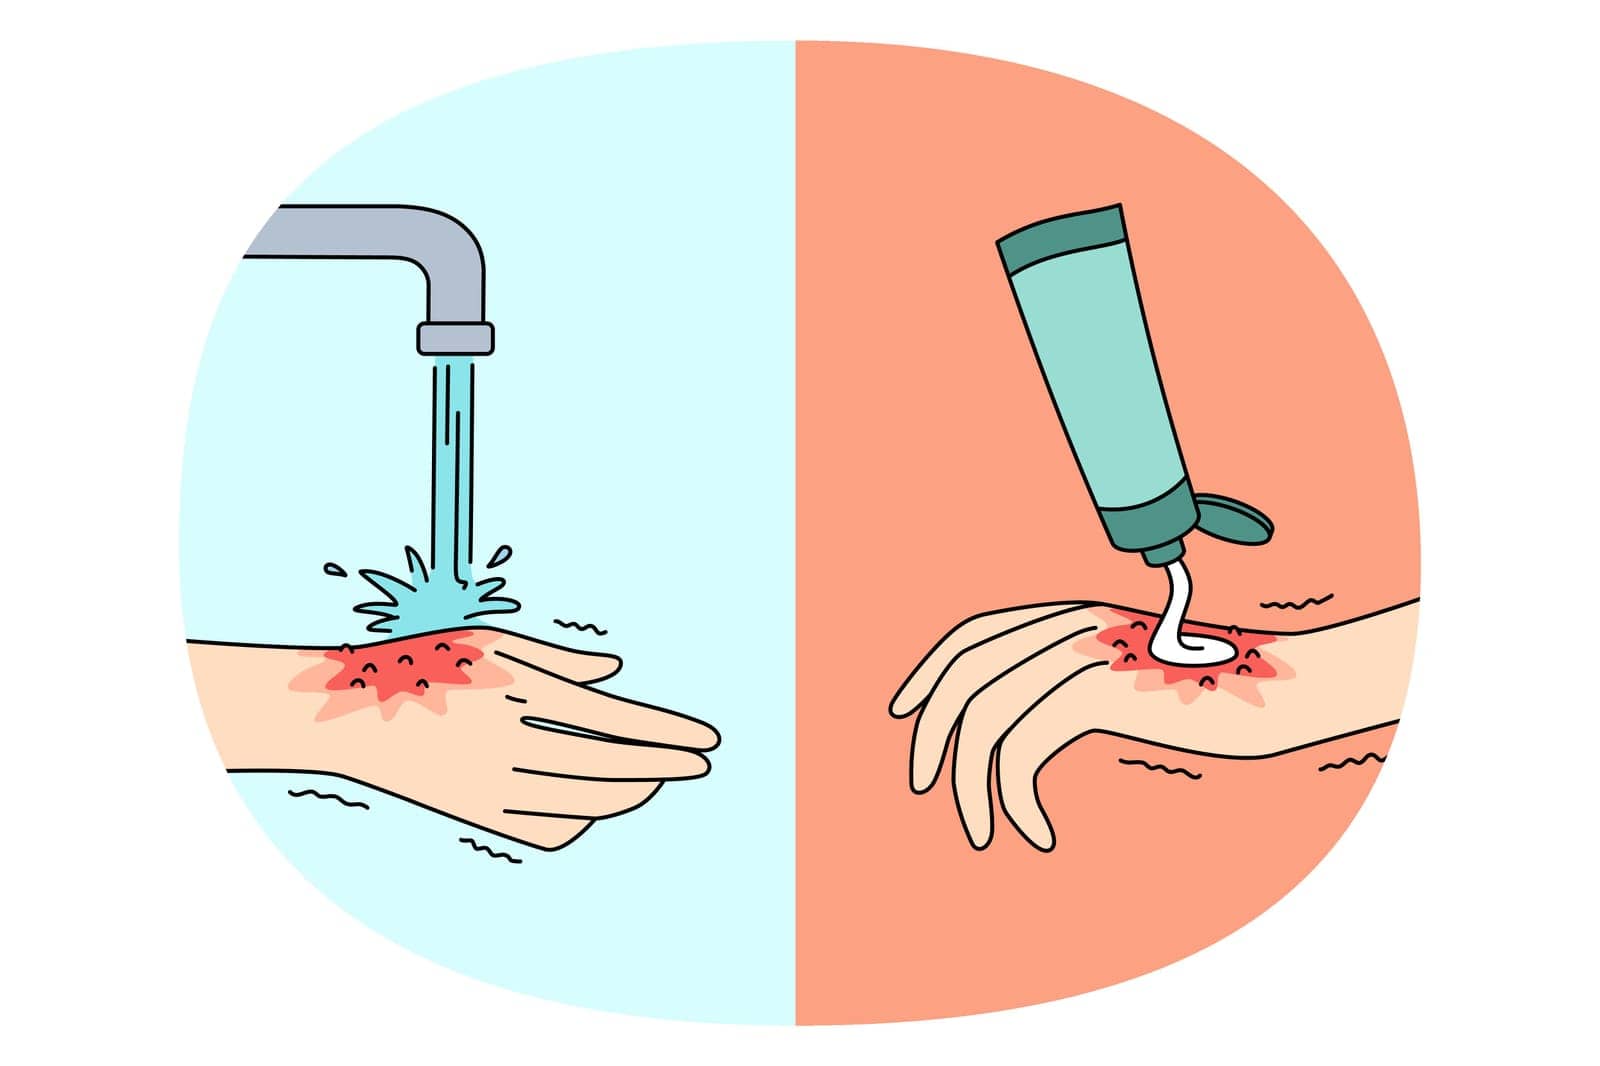 Hygiene and cleaning hands concept. Human hand applying cream and washing with water from tap cleaning saving everyday hygiene and curing injury vector illustration